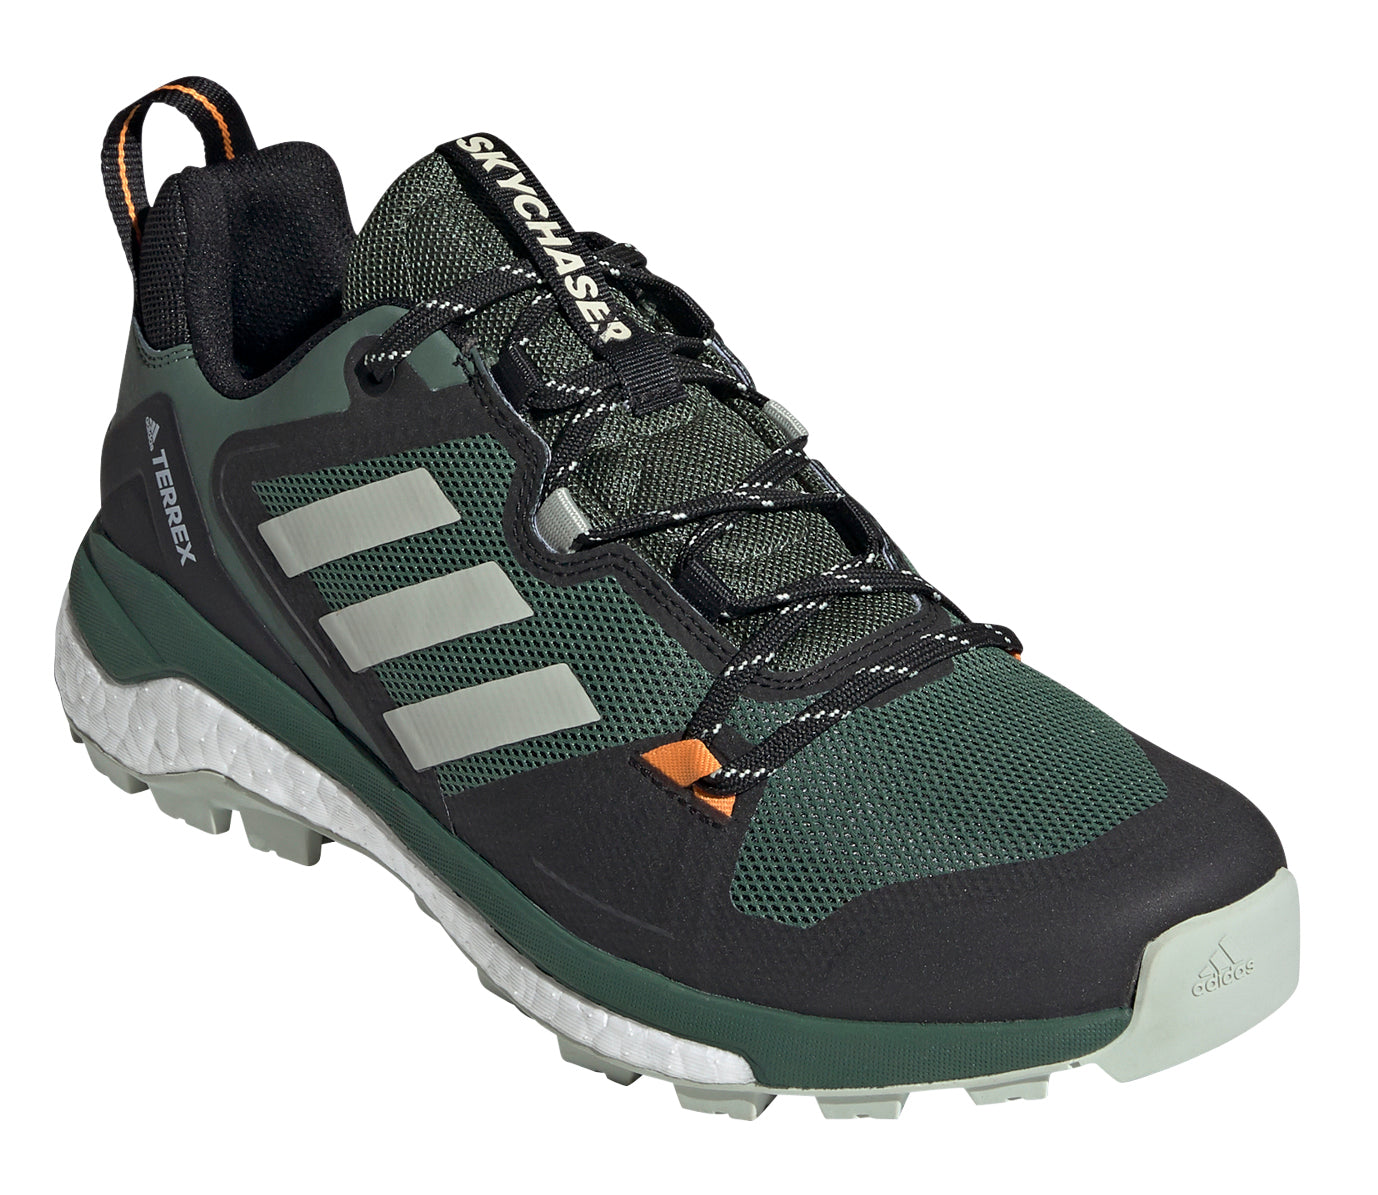 Men's adidas Terrex Skychaser 2.0 Hiking Shoe in Green Oxide/Halo Green/Crew Orange from the front